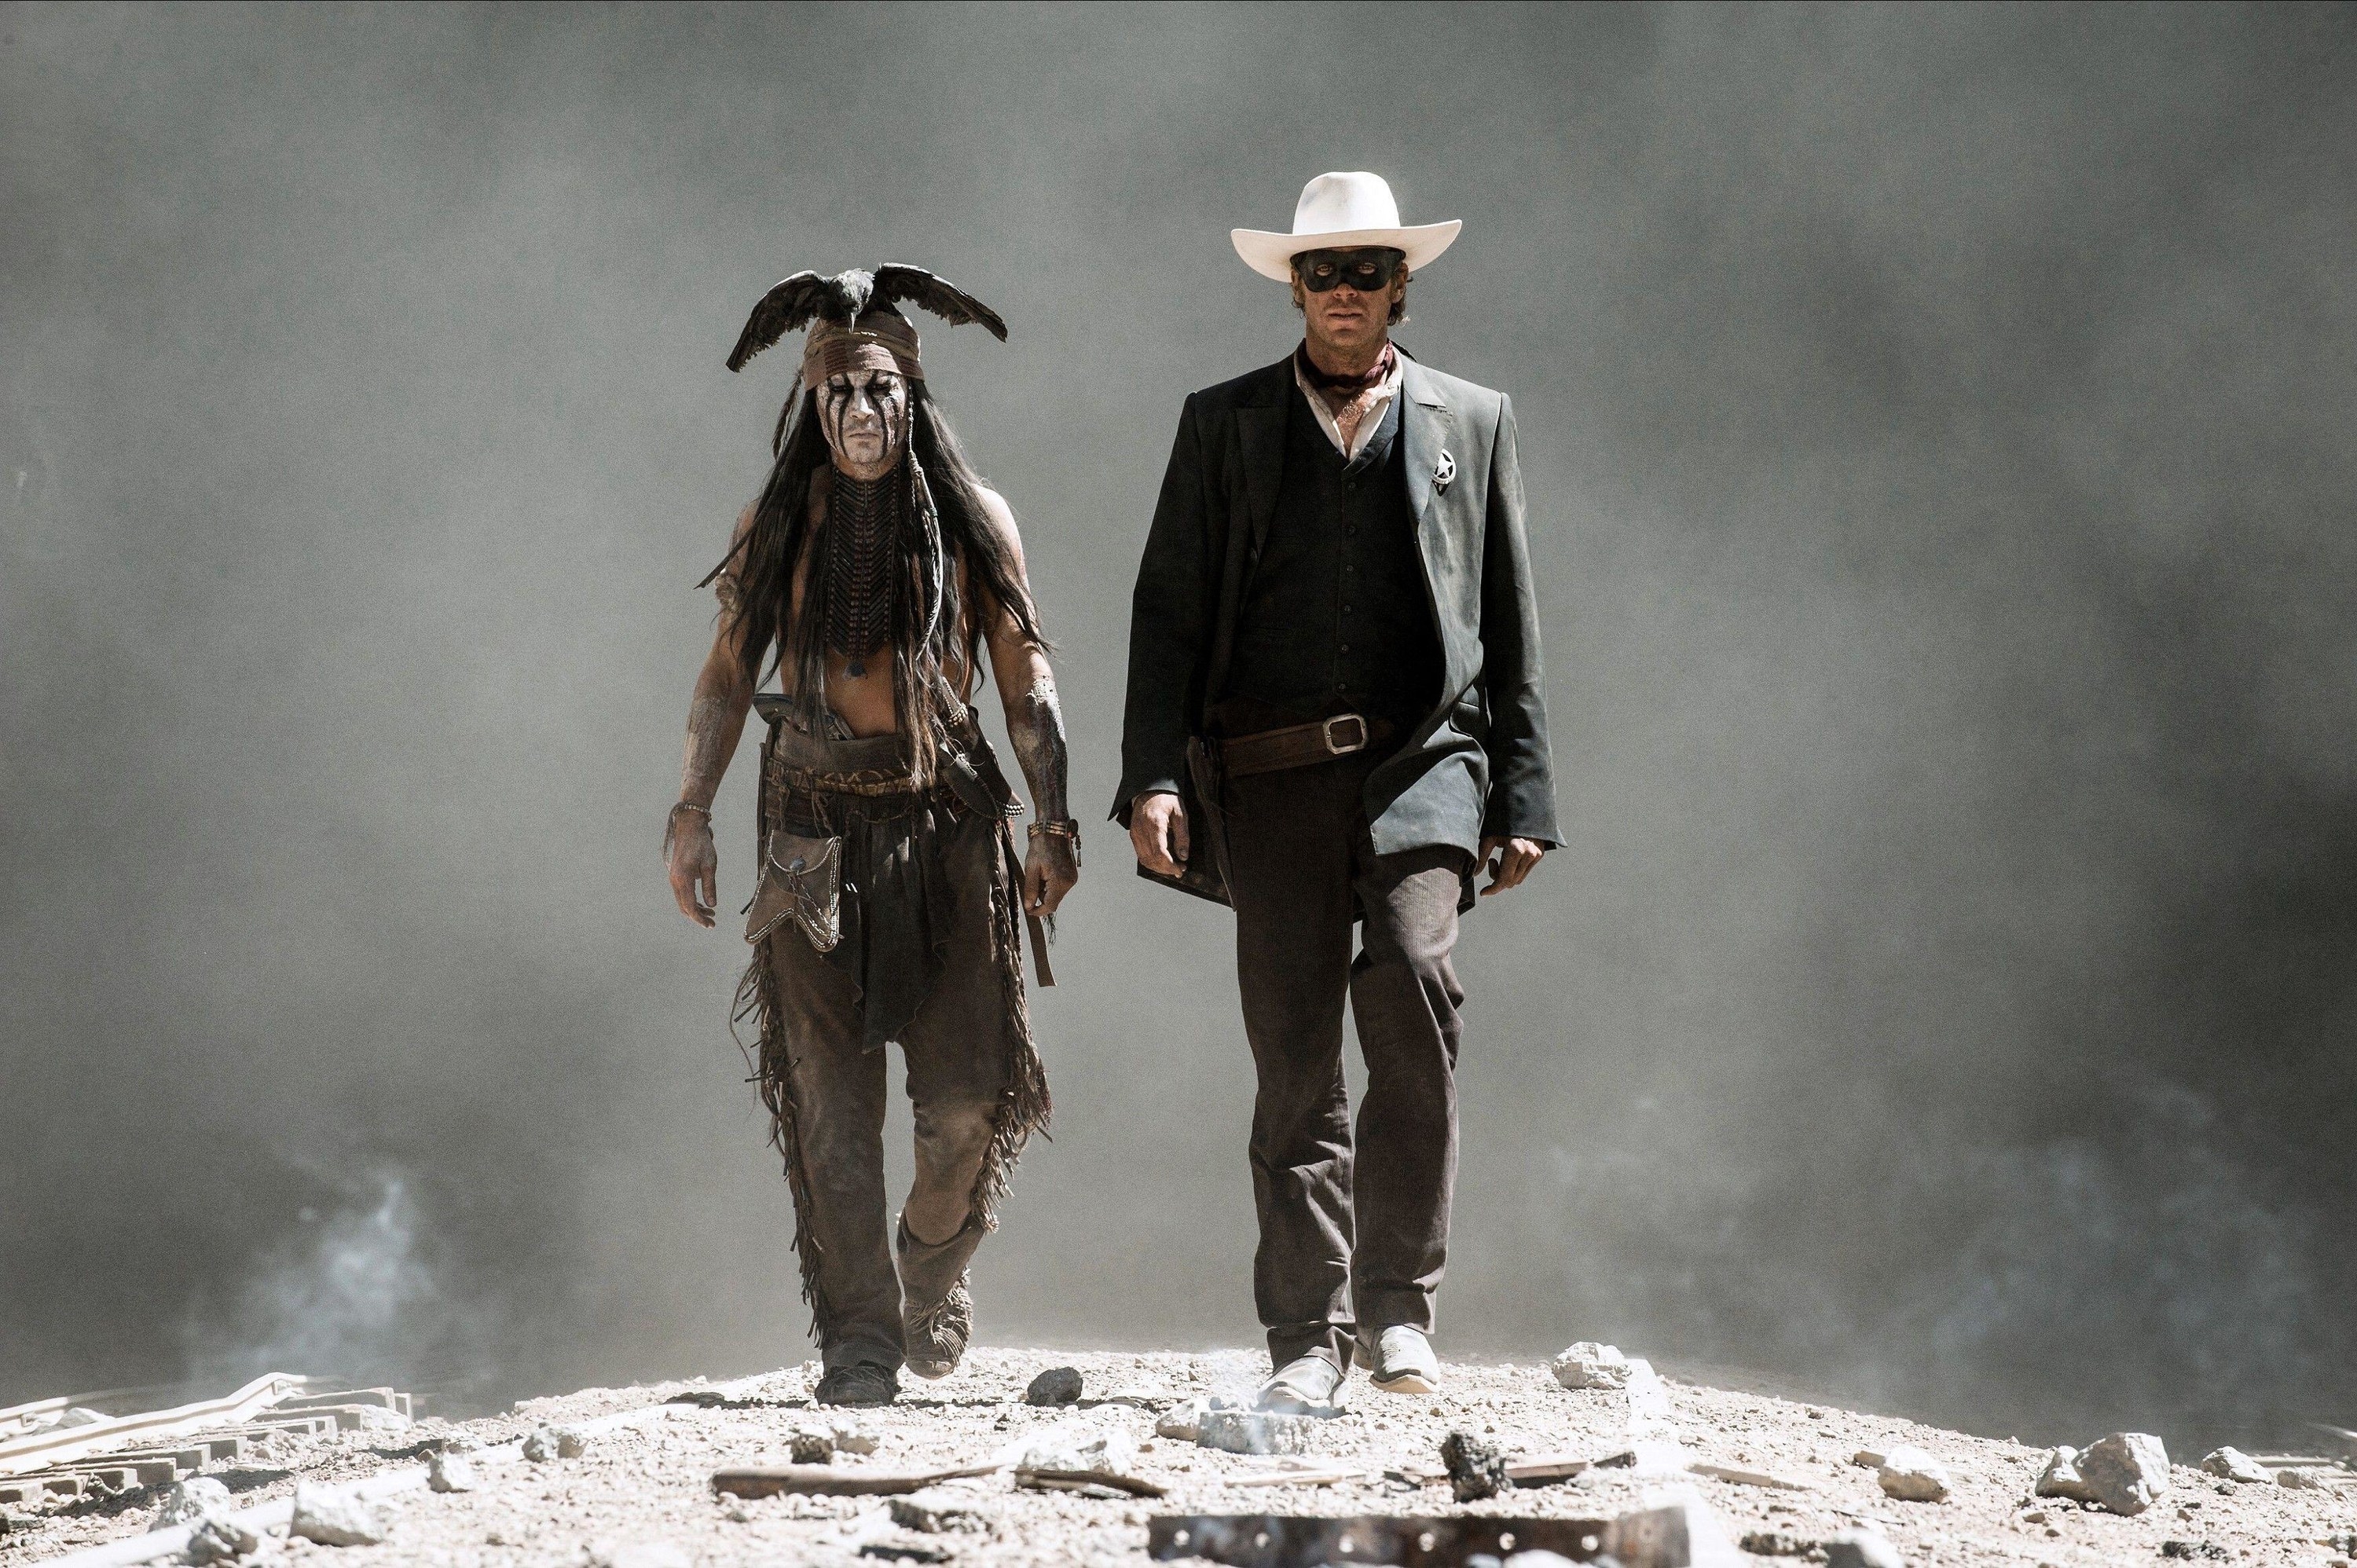 A Native American and a Cowboy walk out of a smoky background